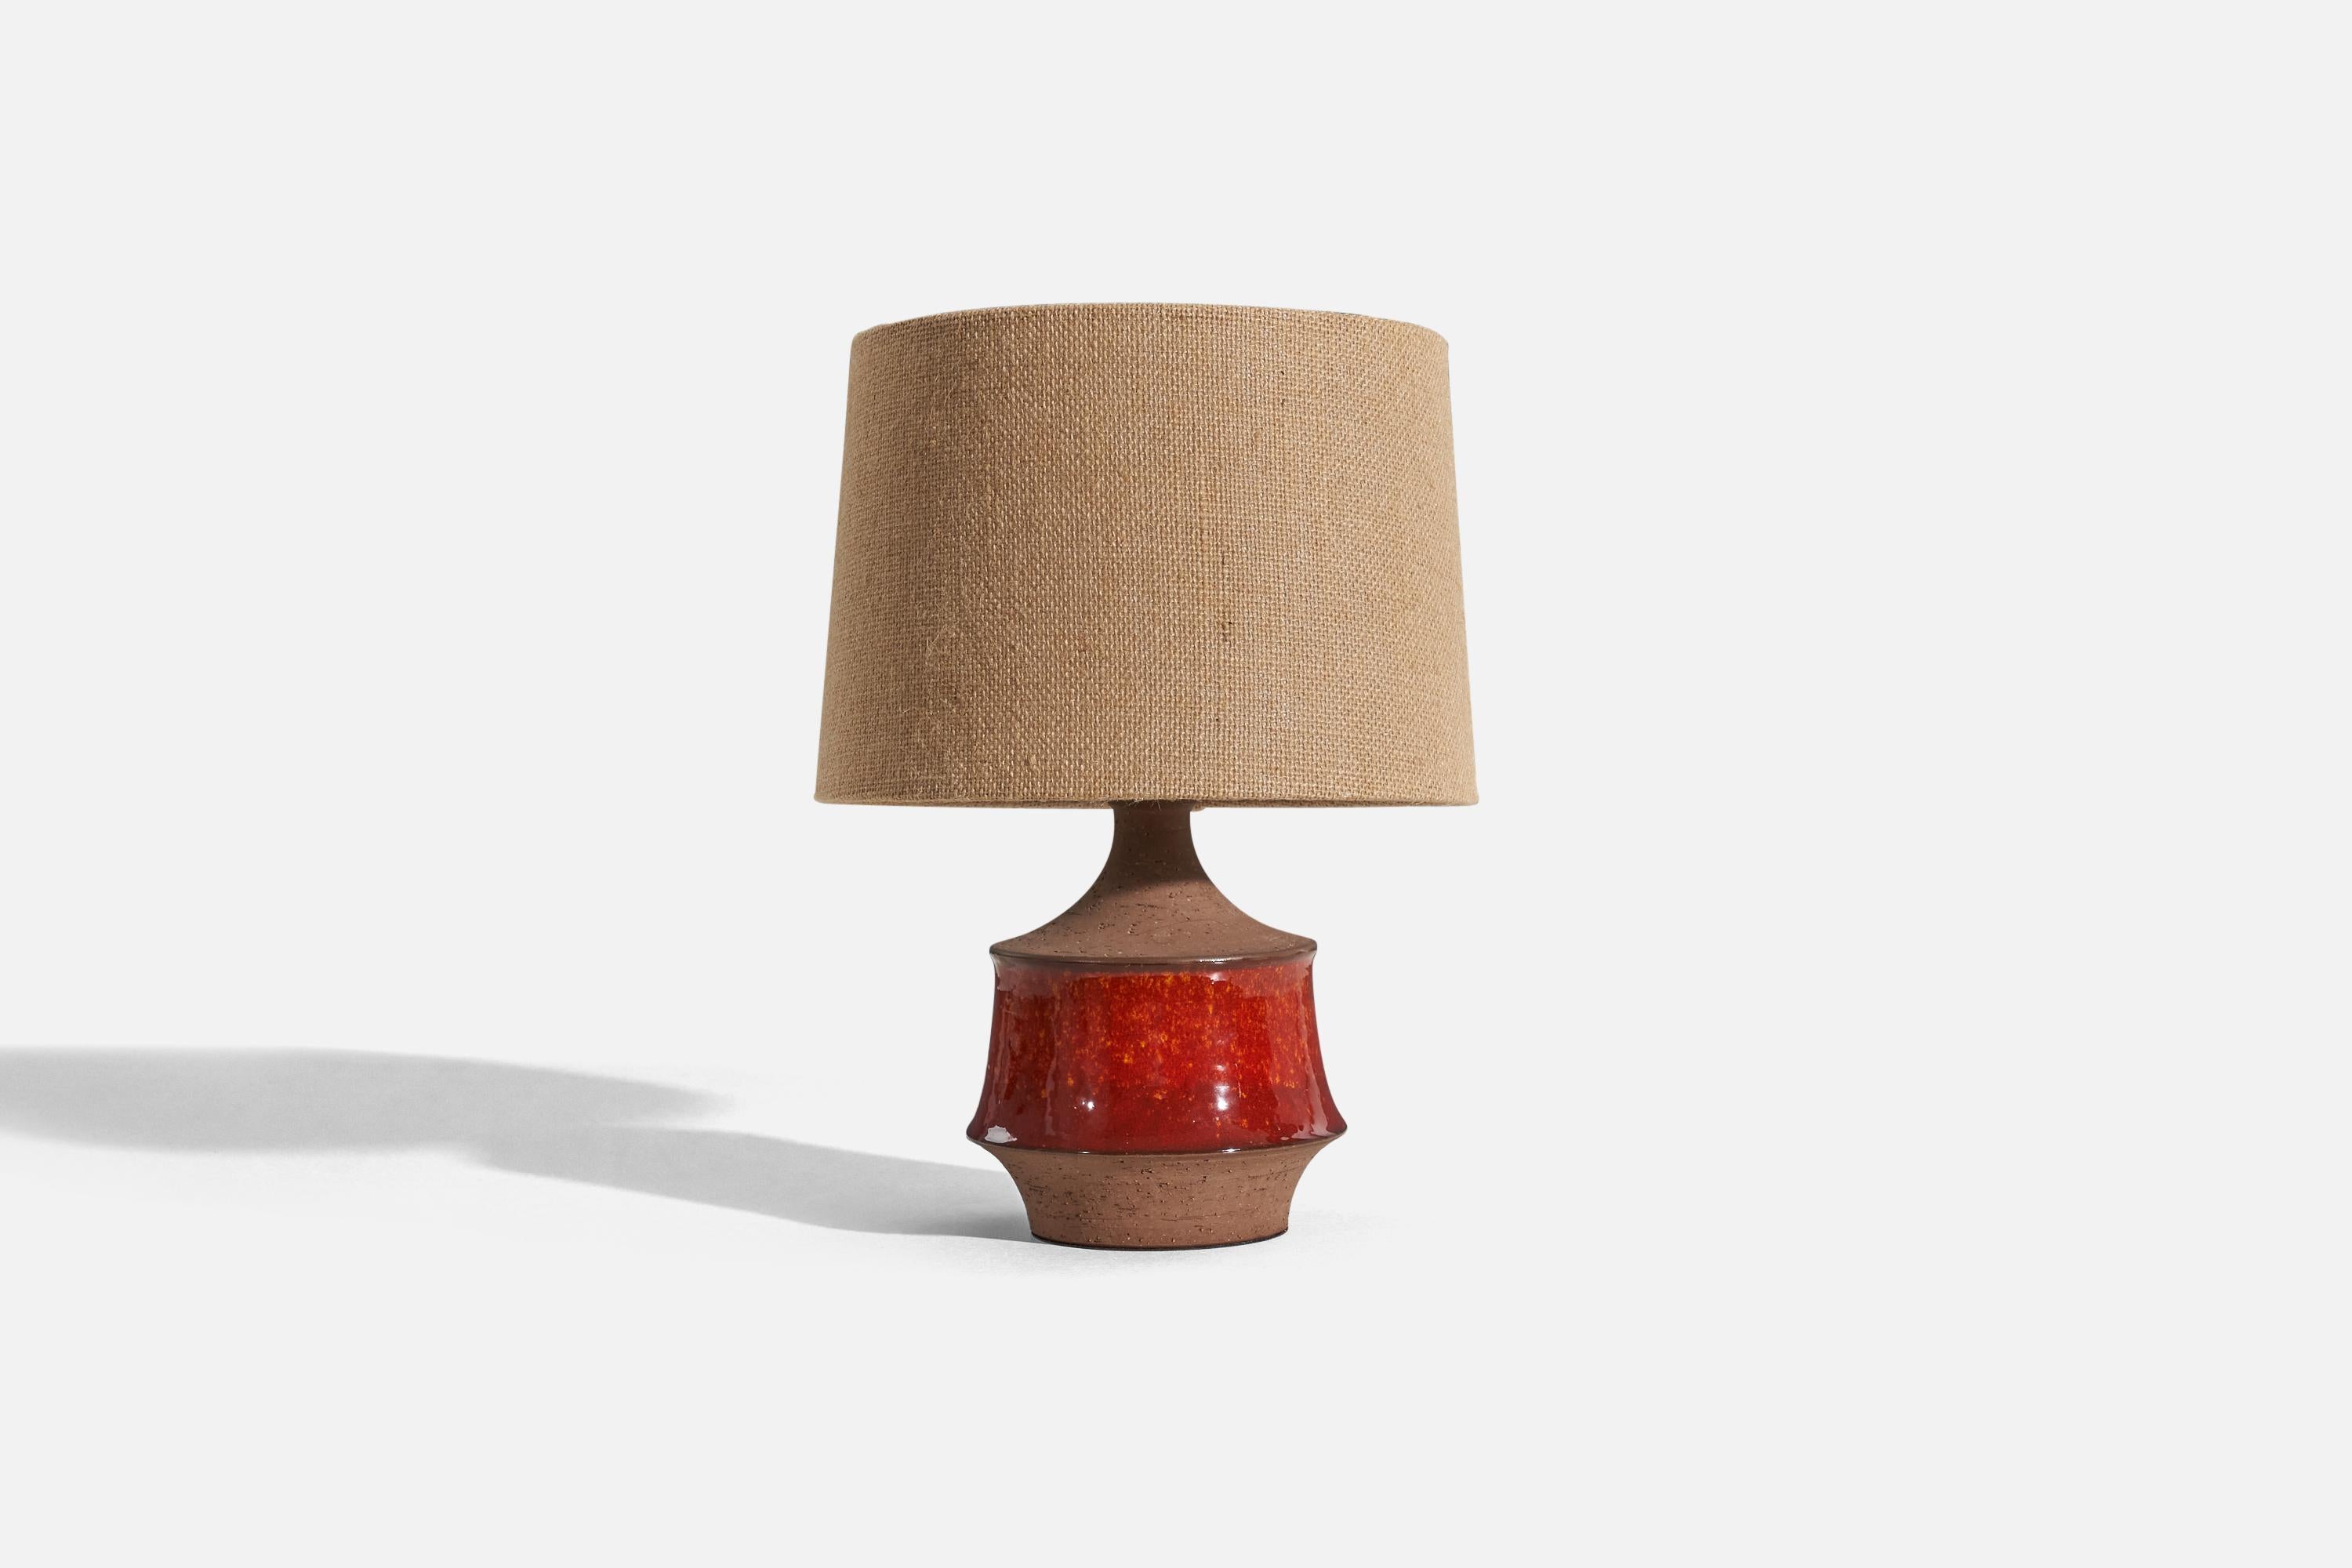 A red-glazed stoneware table lamp designed and produced by Michael Andersen Keramik, Denmark, 1960s.

Sold without lampshade. 
Dimensions of Lamp (inches) : 9.5 x 5.875 x 5.875 (H x W x D)
Dimensions of Shade (inches) : 9 x 10 x 7 (T x B x